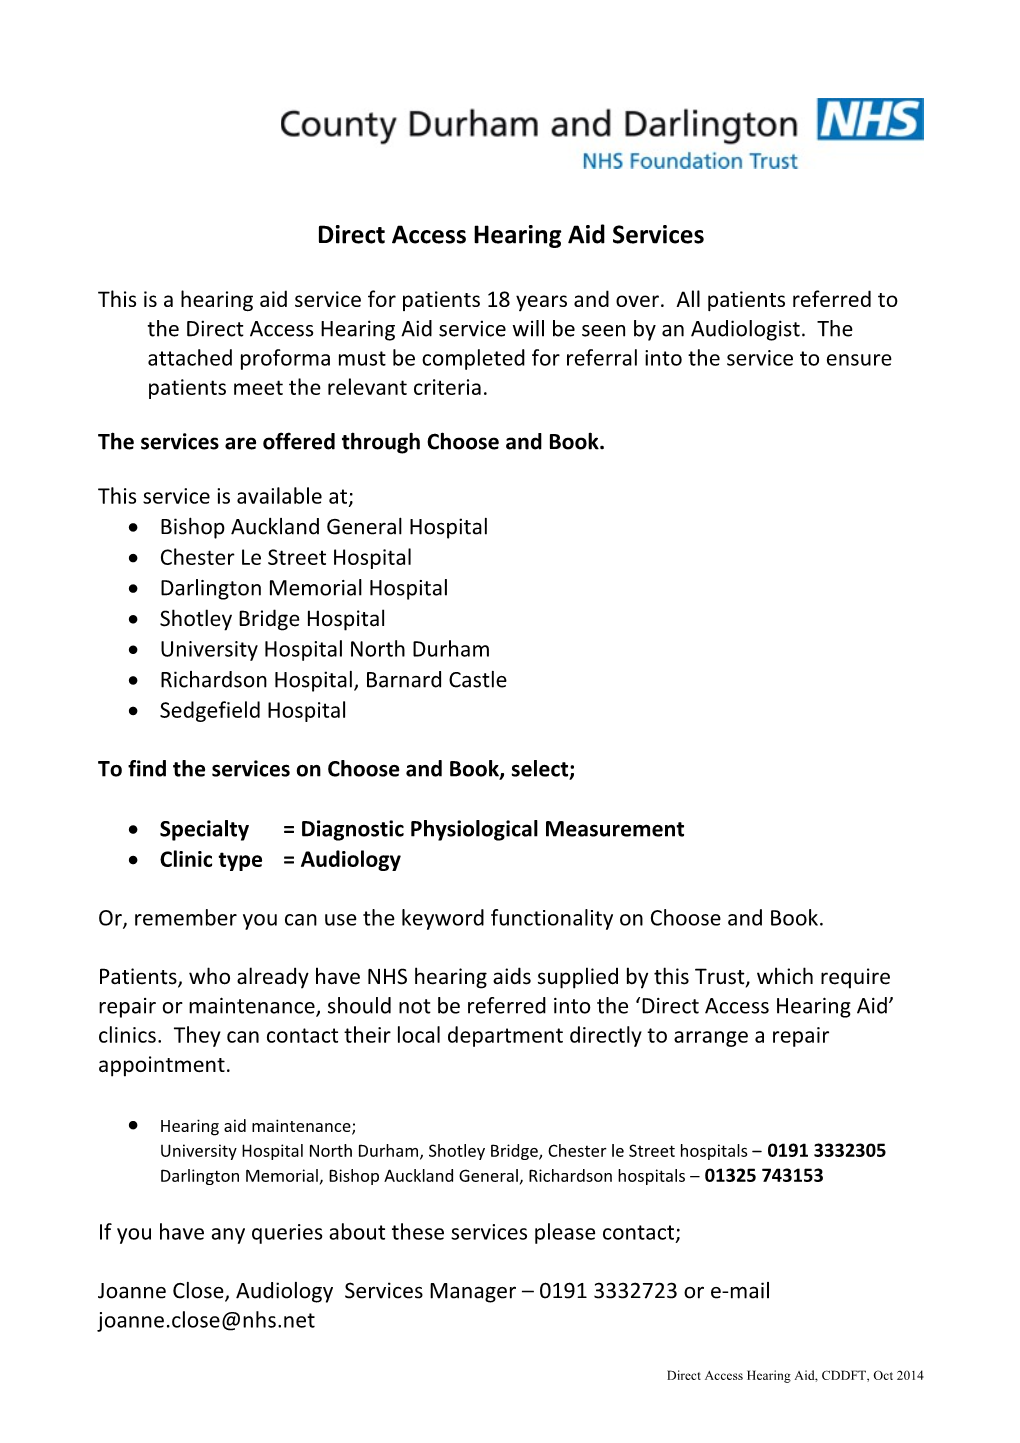 Direct Access Hearing Aid Services